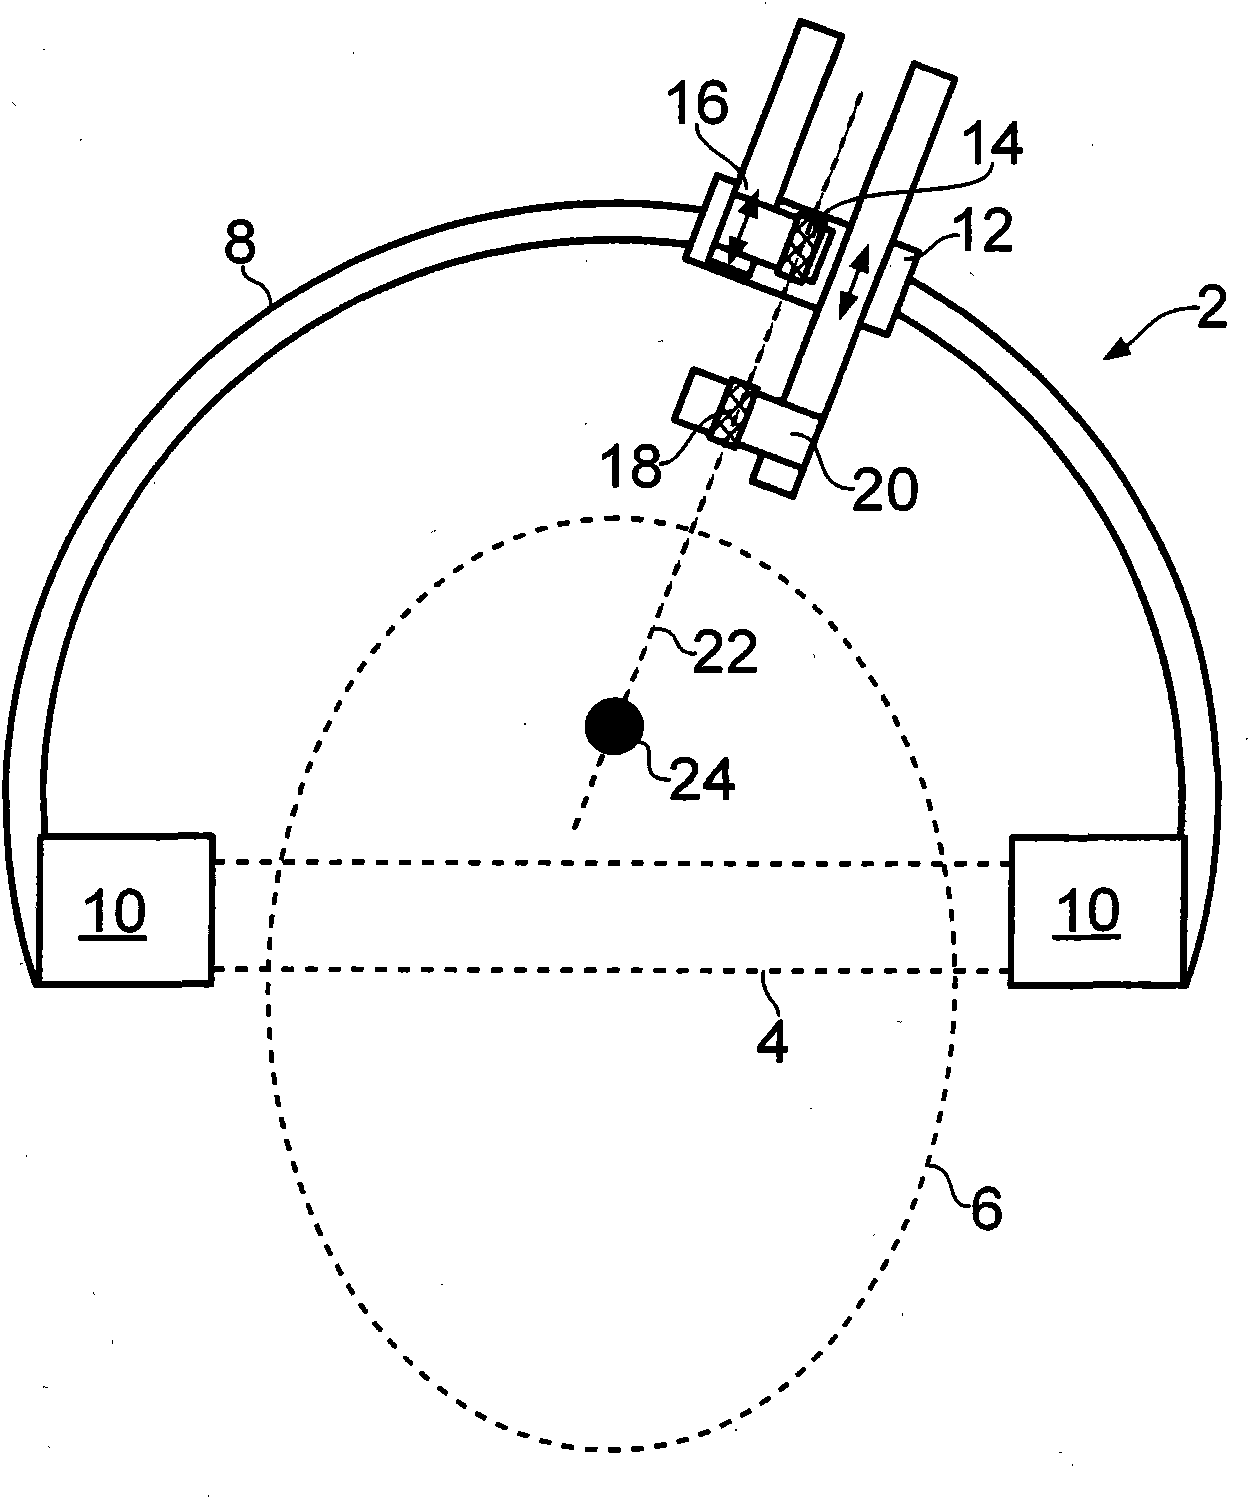 Apparatus for stereotactic neurosurgery